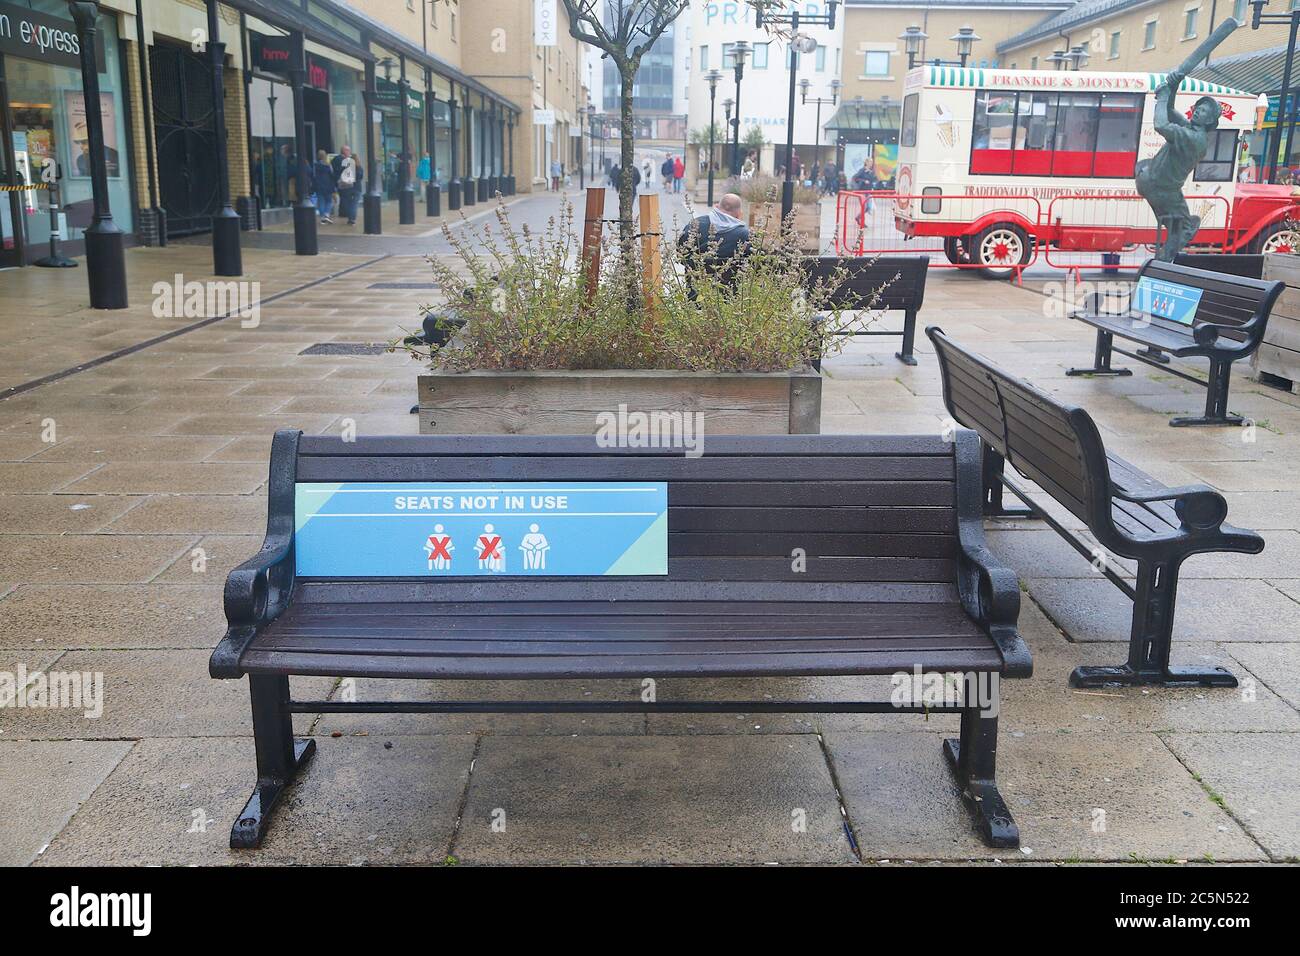 Hastings, East Sussex, UK. 04 Jul, 2020. Coronavirus update: With the government relaxing the rules further, bars, pubs, restaurants and barbershops are allowed to open. Bench with sign specifying seats not in use. Photo Credit: Paul Lawrenson-PAL Media/Alamy Live News Stock Photo